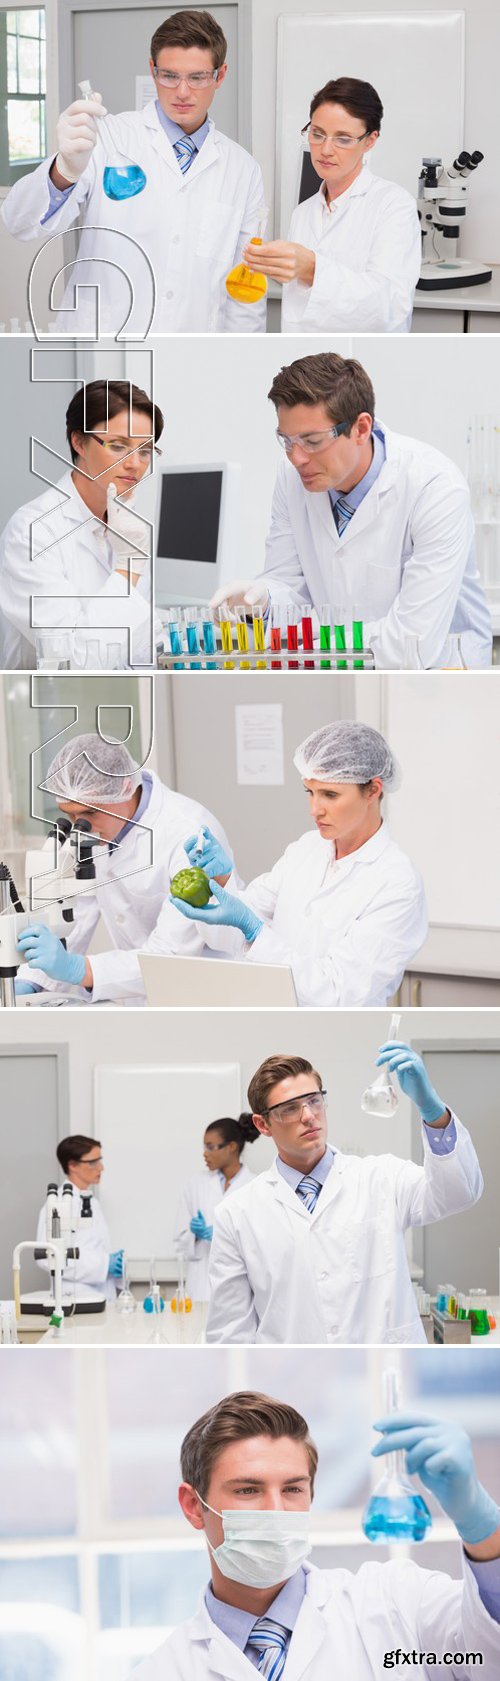 Stock Photos - Scientists working attentively with test tube in laboratory